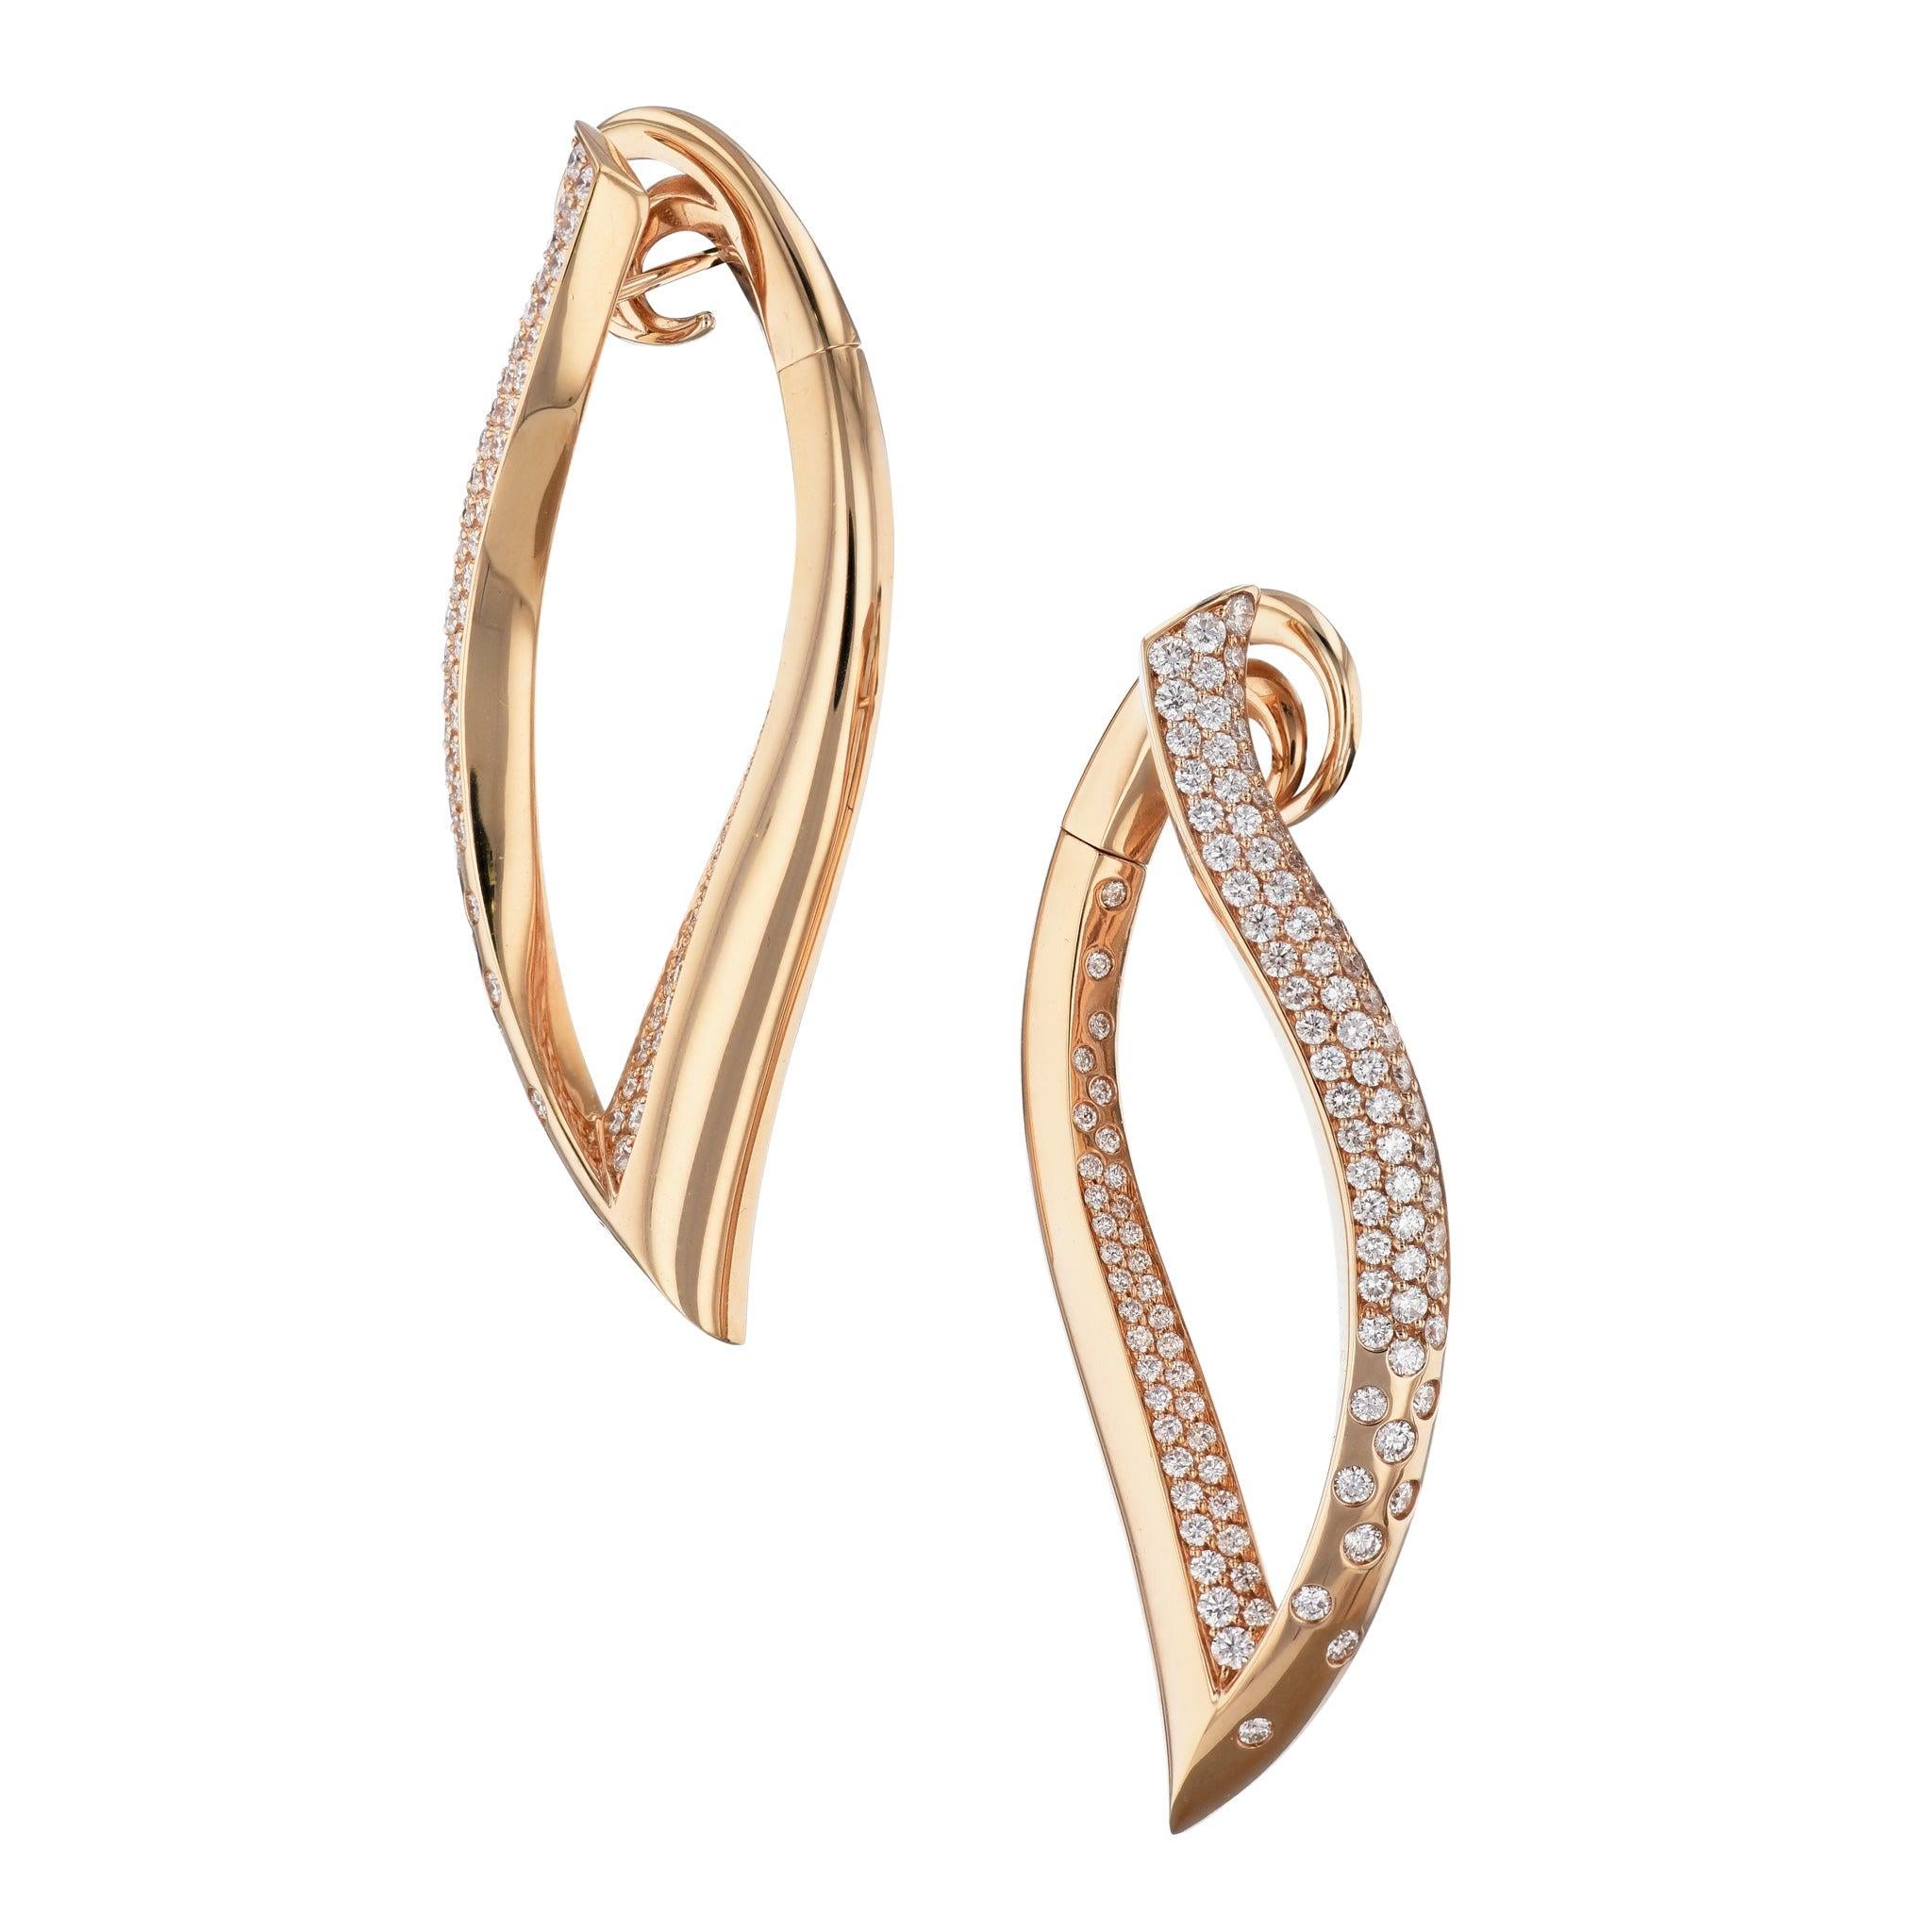 These stunning long drop earring are sure to make a statement!

These are crafted from 18 karat rose gold, and have a total weight of 3.38 carats.
Rose Gold and Diamond Pave Earrings.

They measure 2.5 inches in length and 1 inch in width.